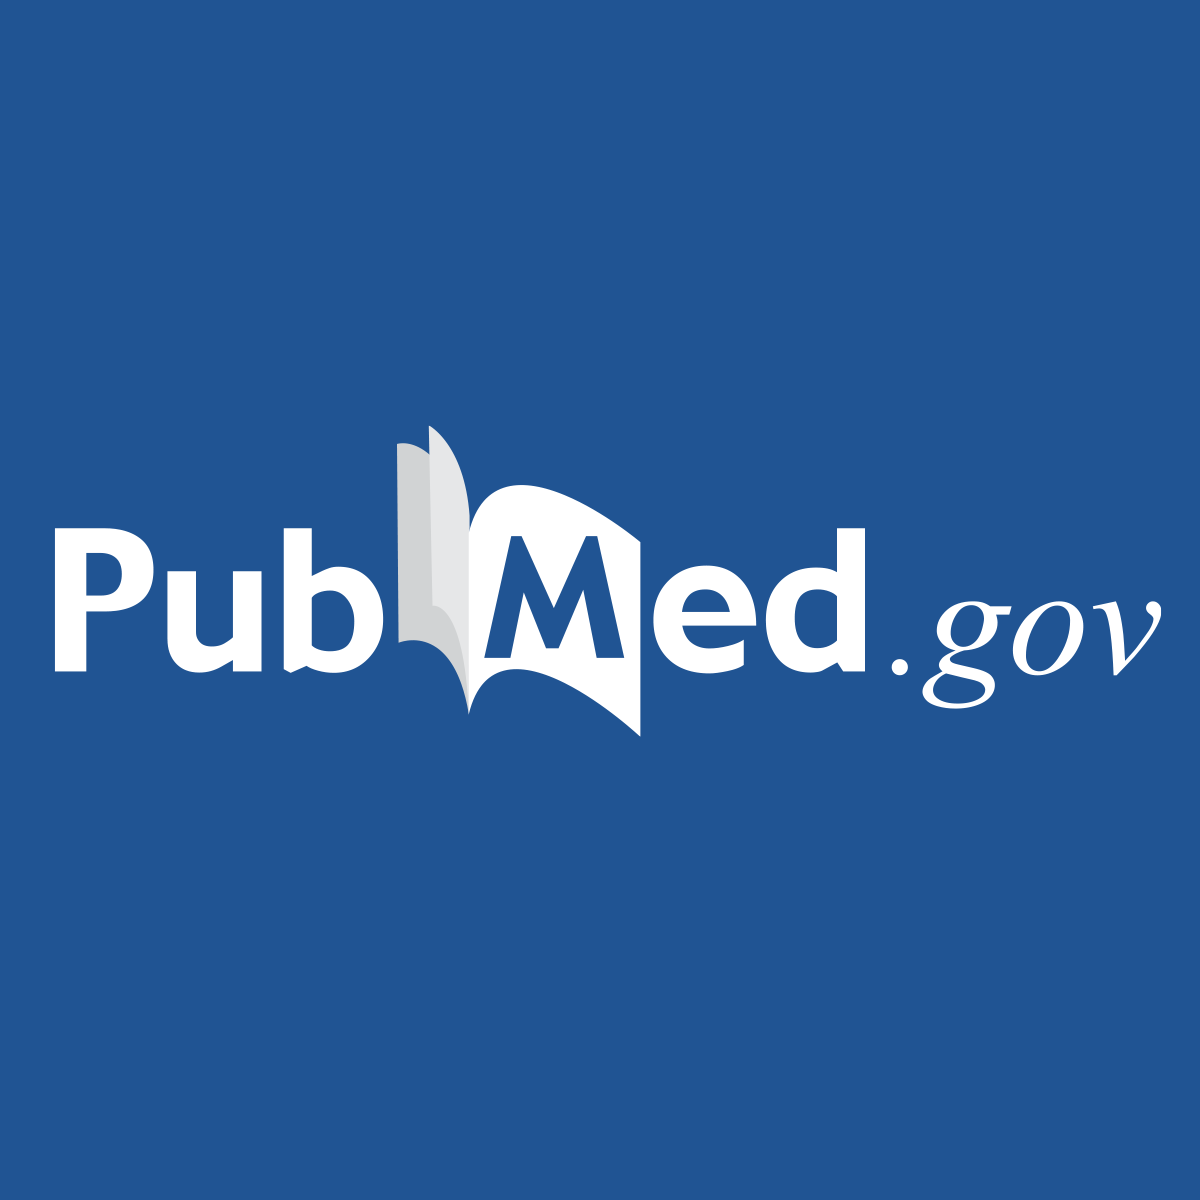 Bevacizumab 5 mg/kg can be infused safely over 10 minutes - PubMed